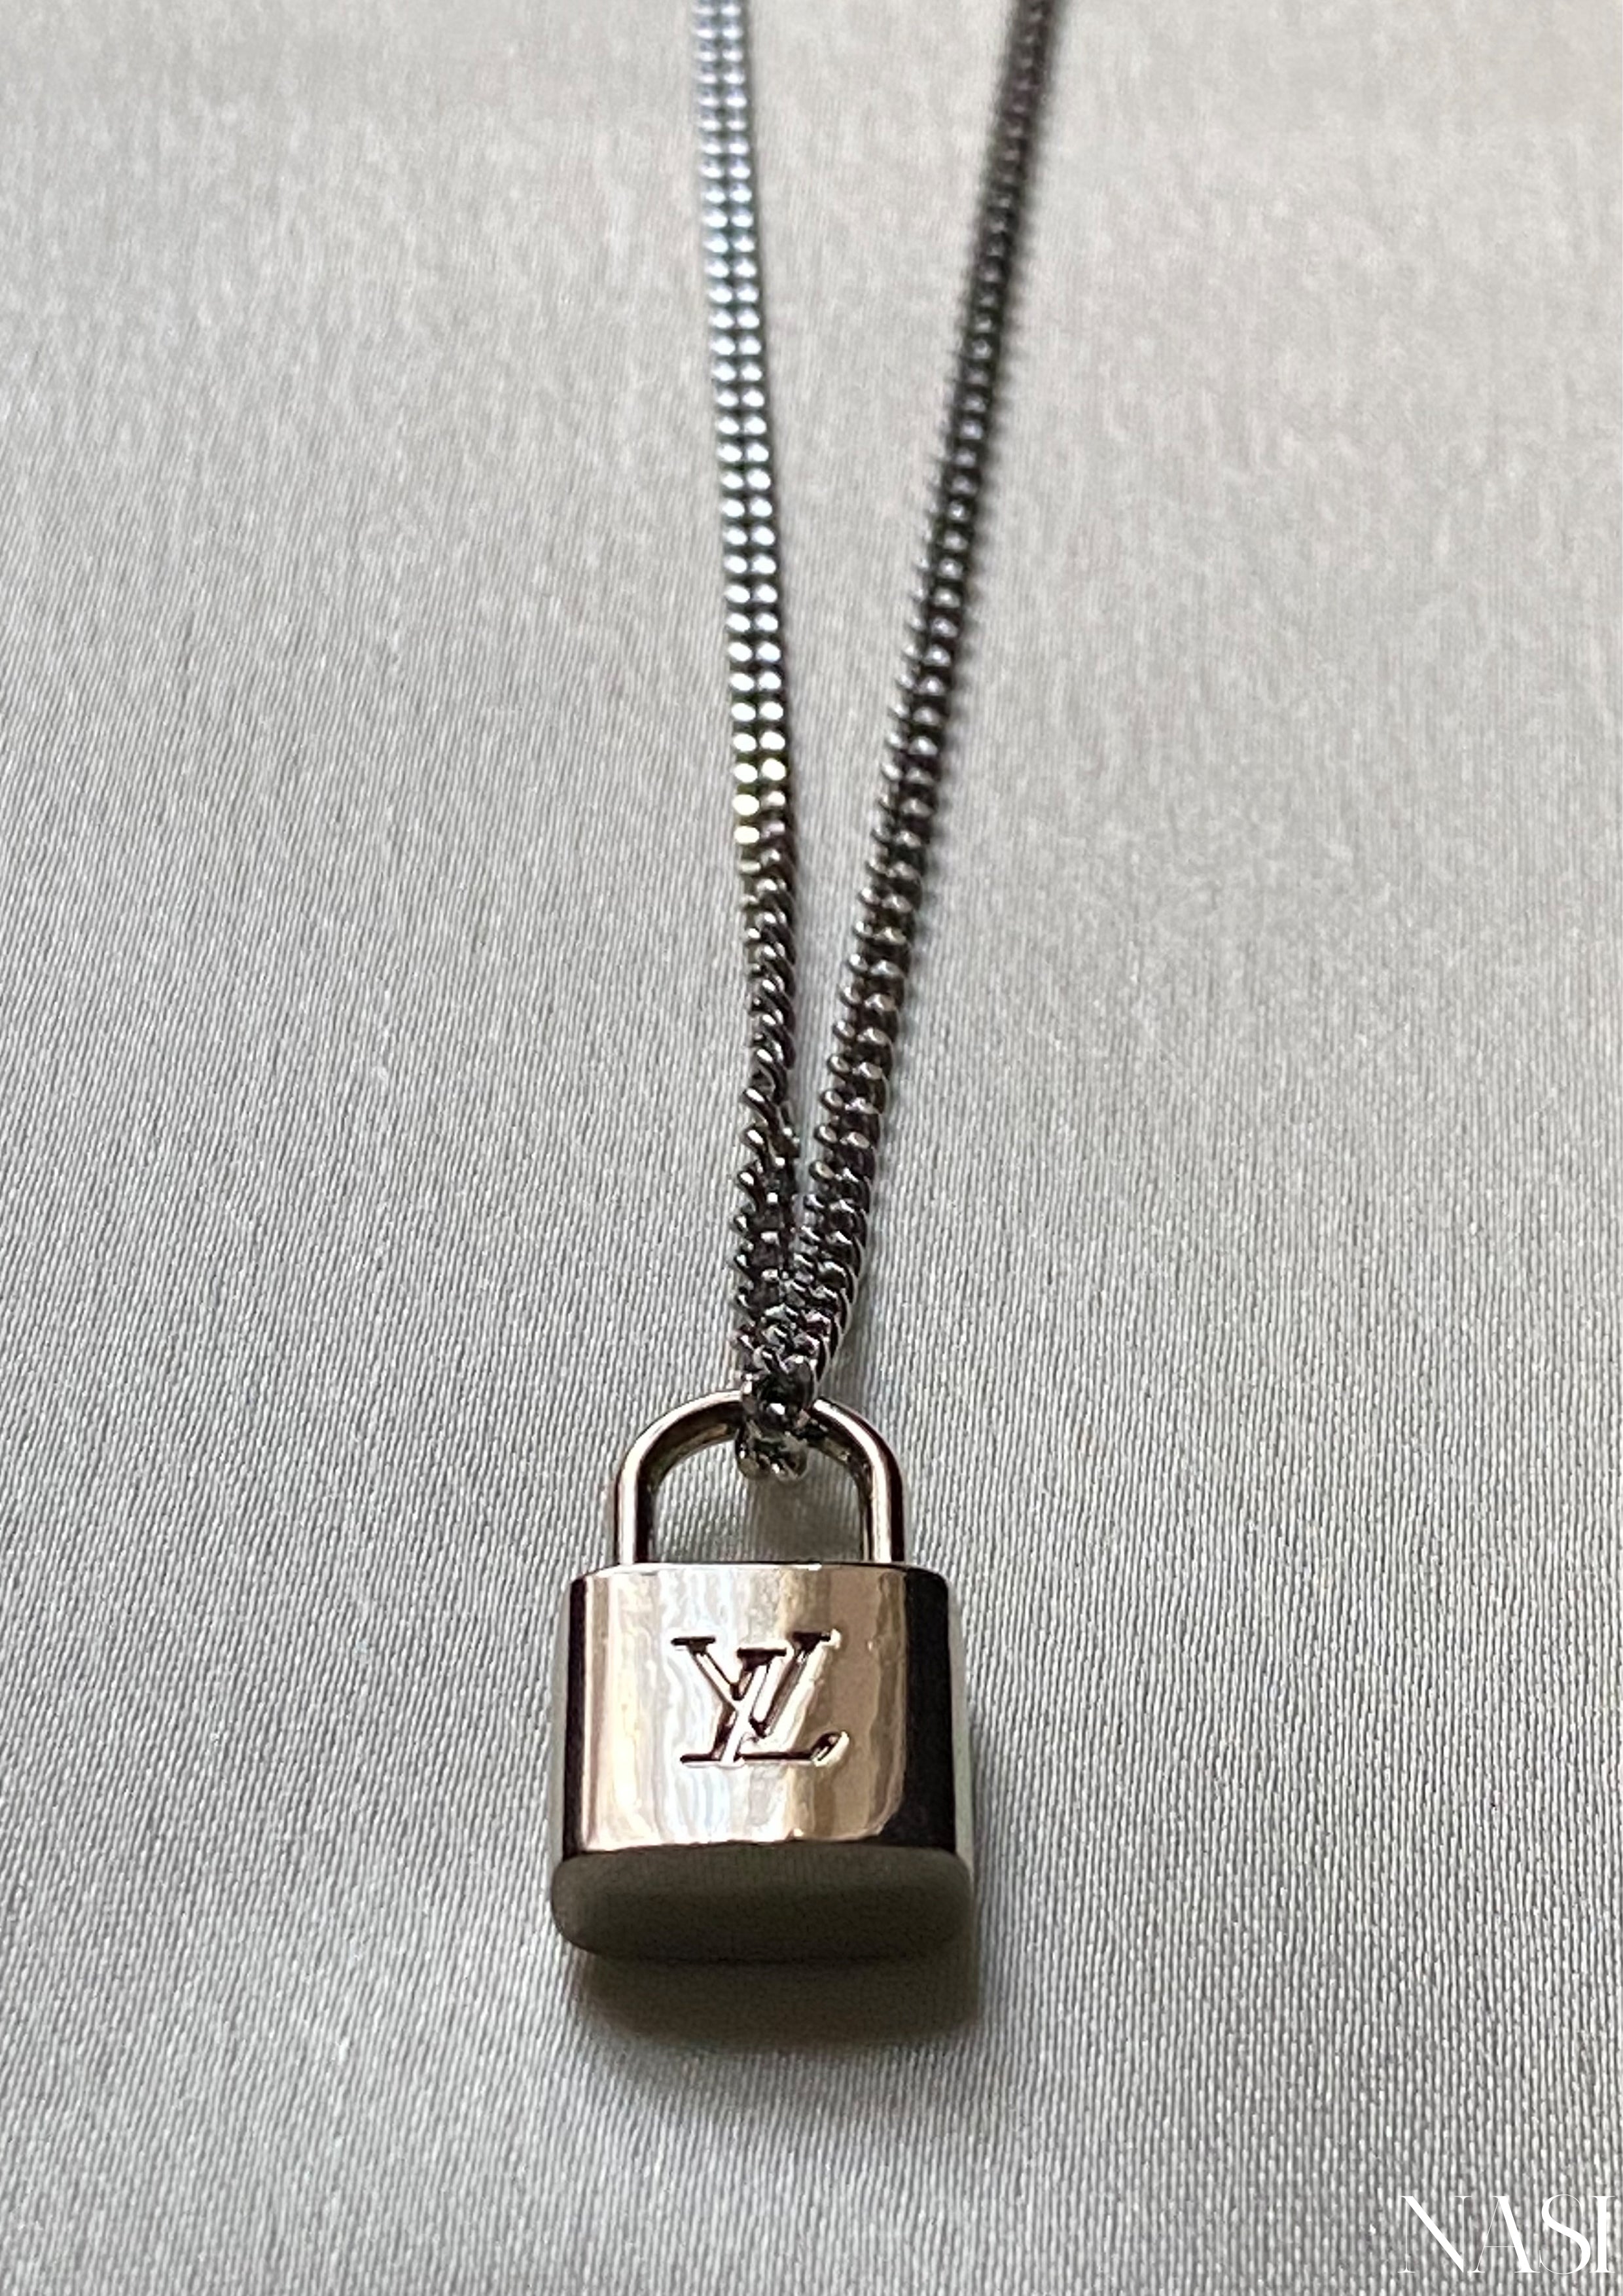 Rework Vintage Silver Louis Vuitton Lock on Necklace with 2 Working Keys